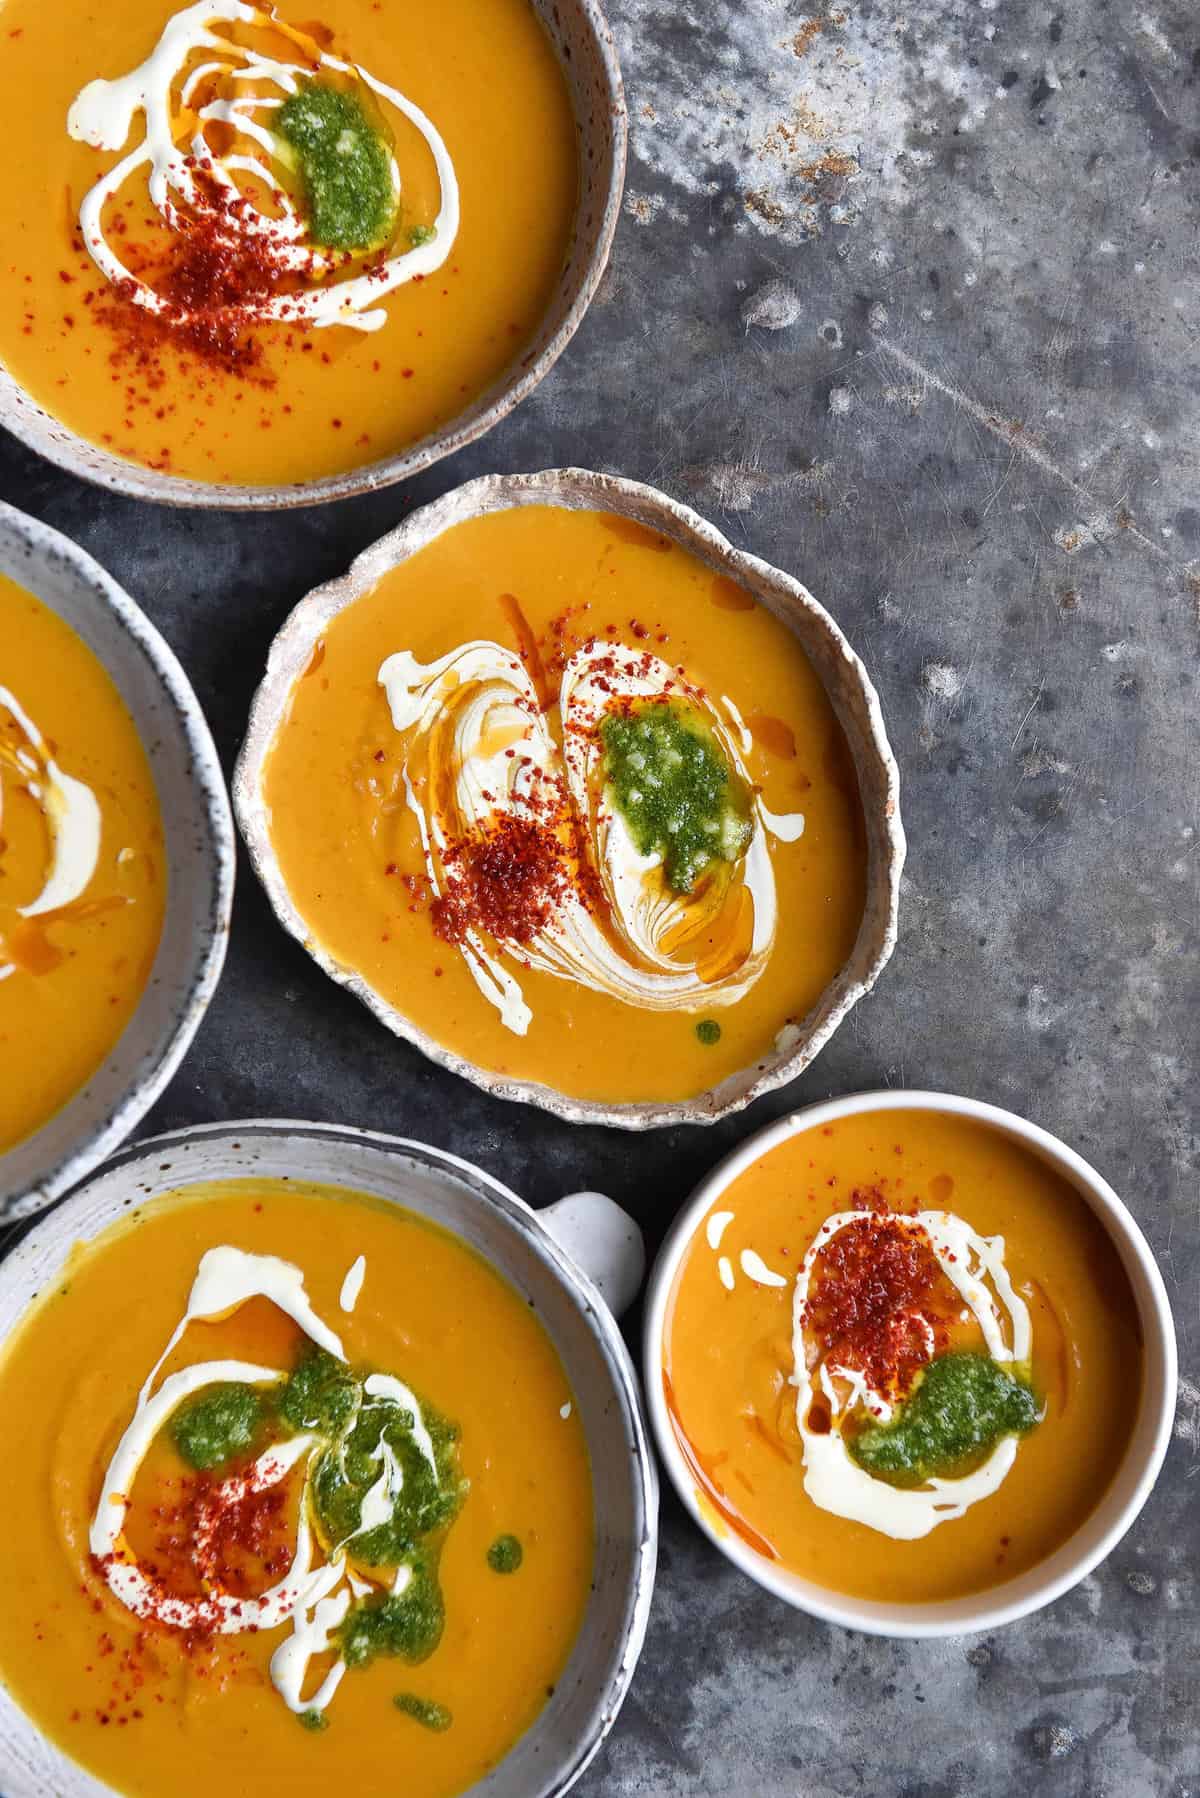 An aerial view of five bowls of FODMAP friendly pumpkin soup topped with a swirl of cream, pesto and chilli flakes. The bowls sit casually arranged atop a mottled grey blue backdrop